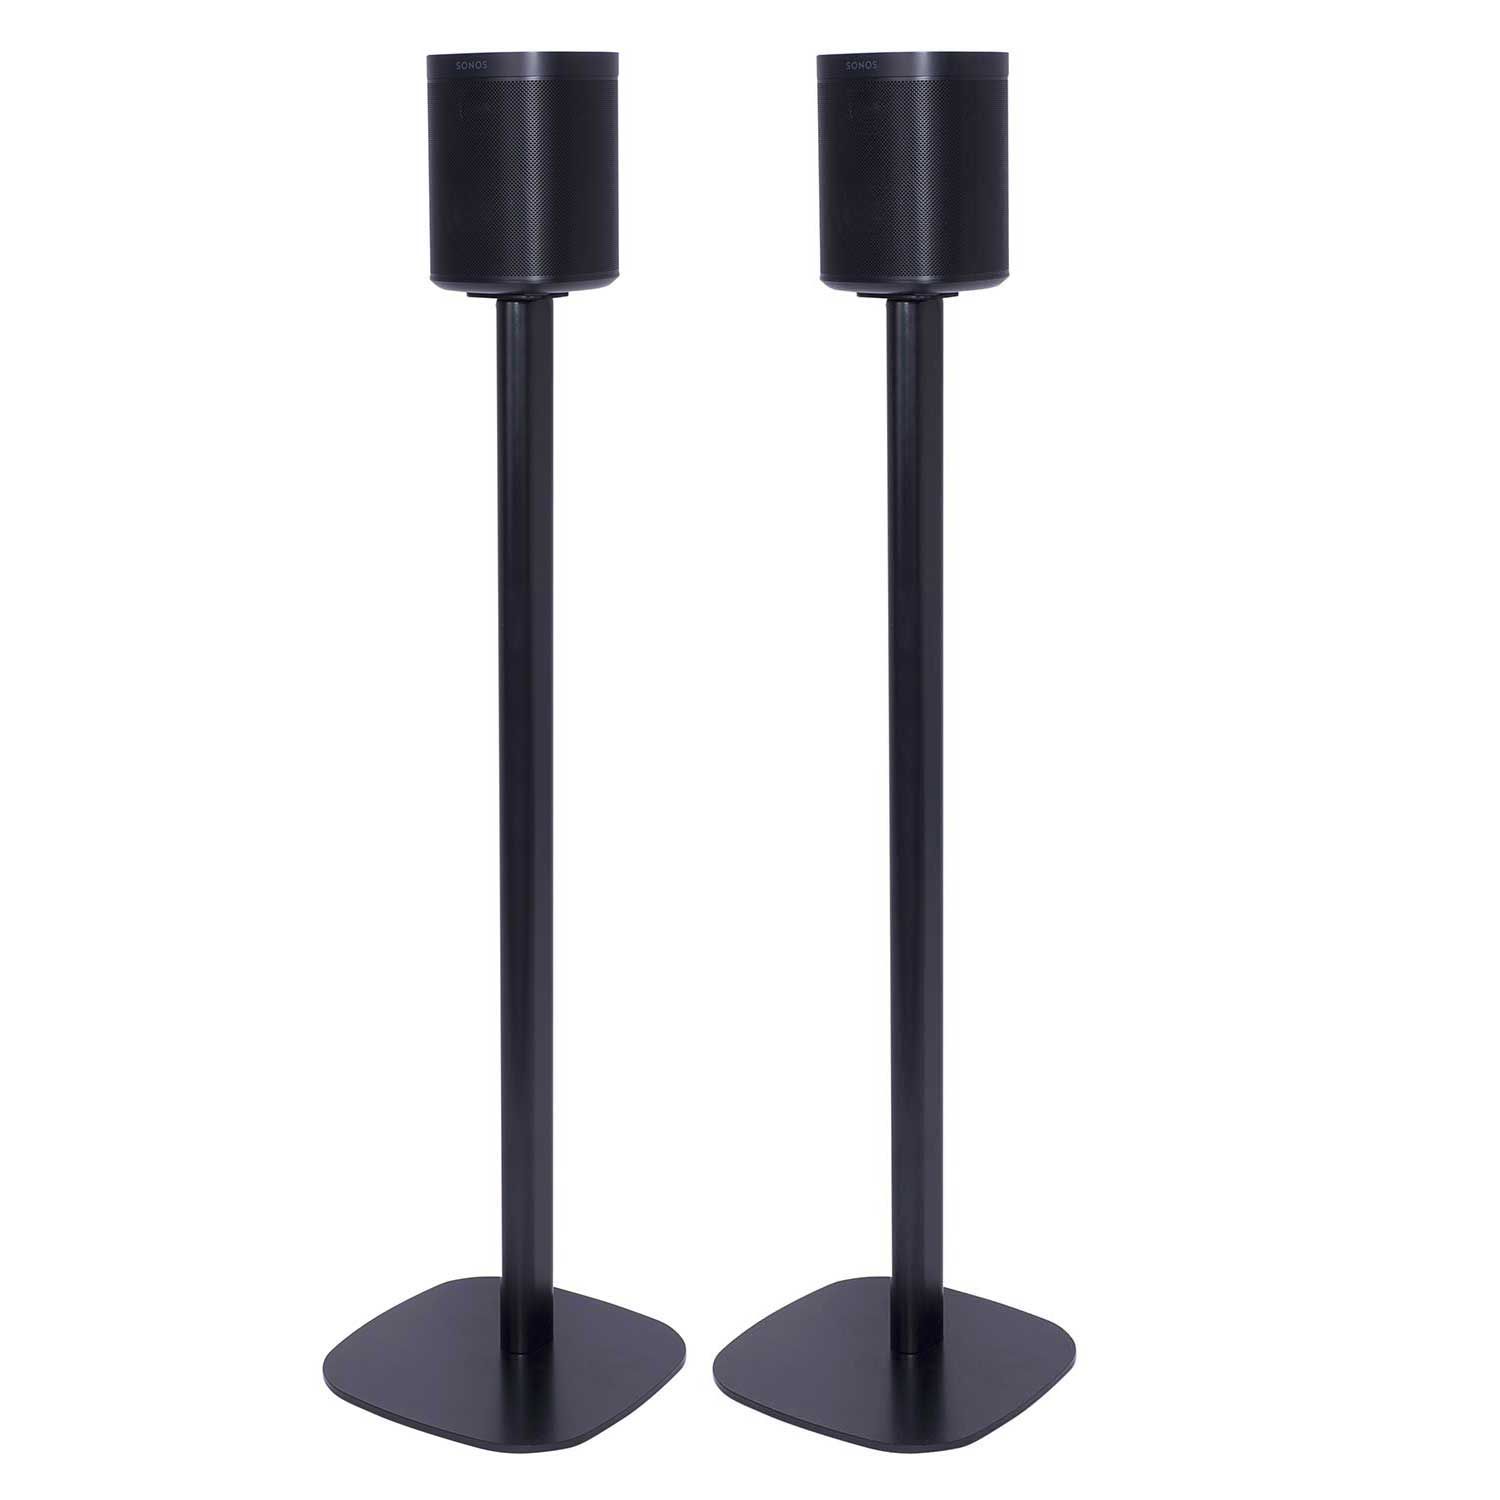 Vebos floor stand Sonos One SL black set | The floor stand for 